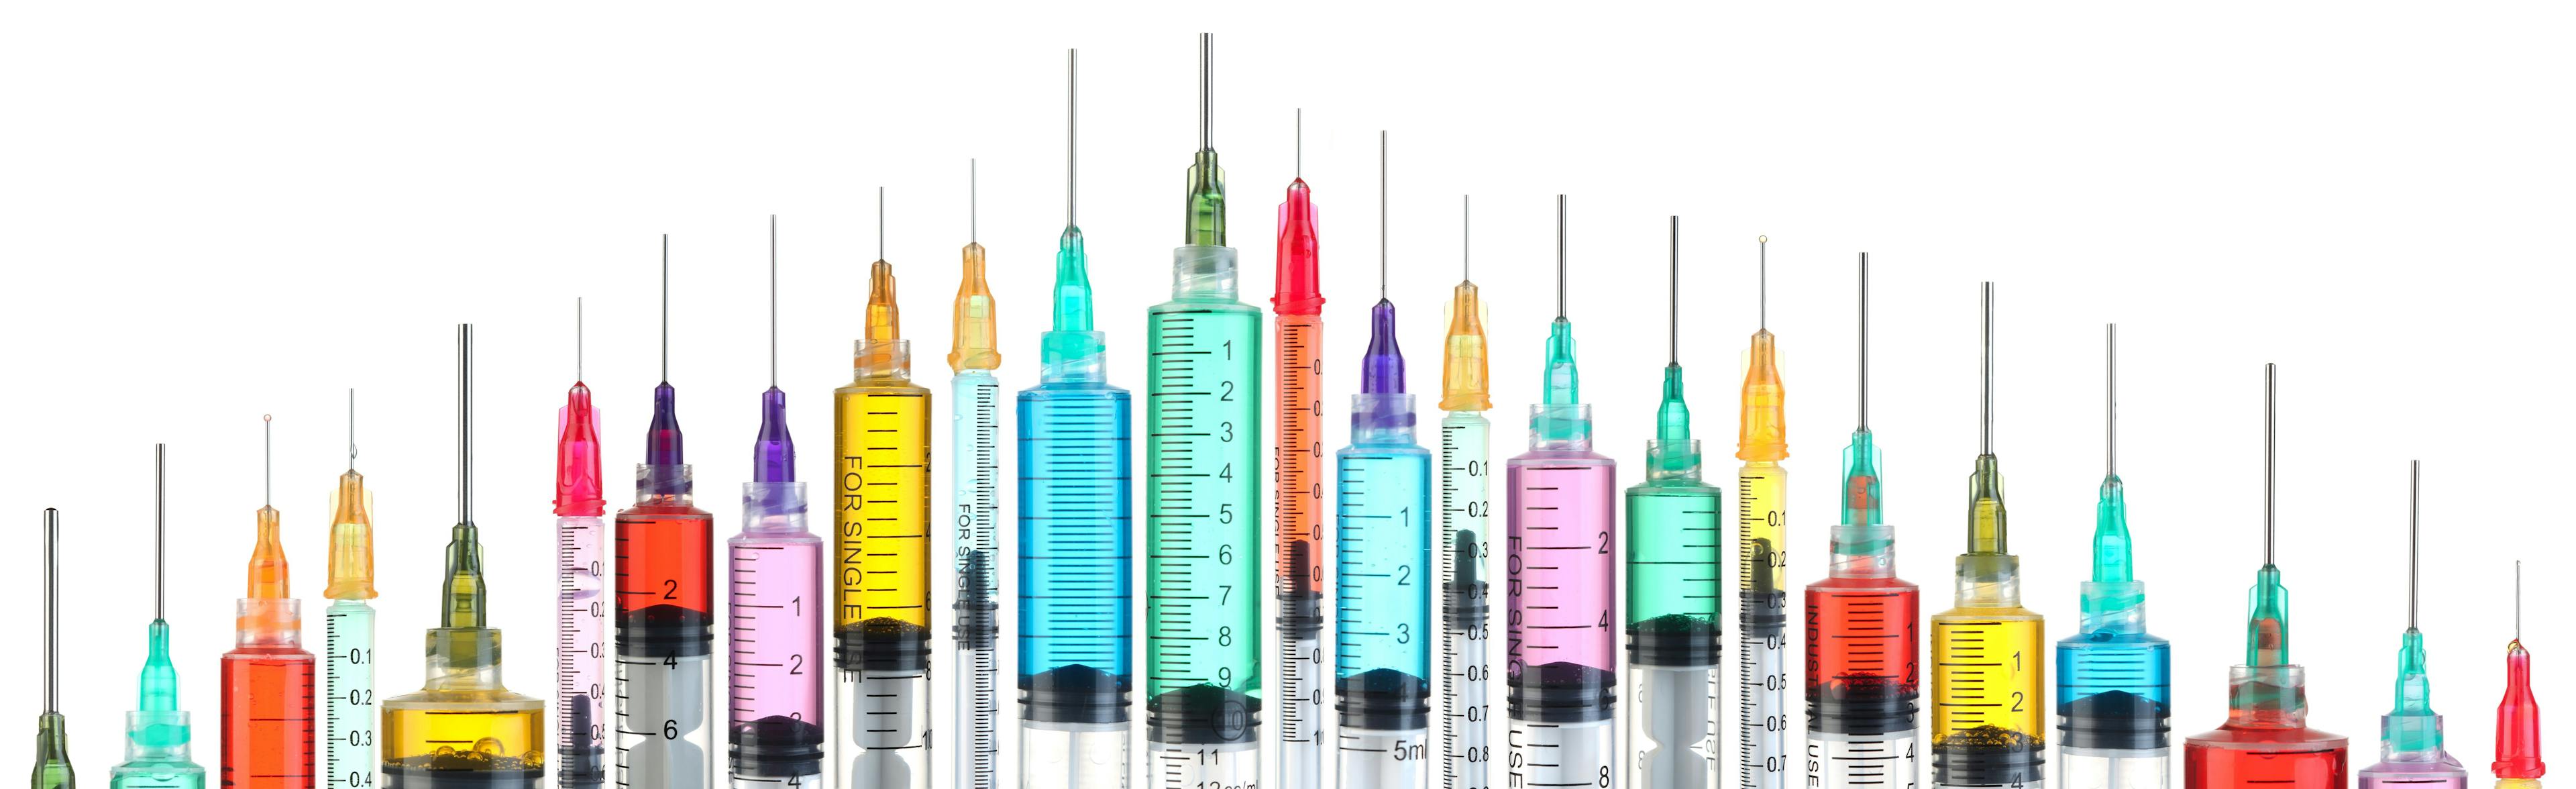 Confronting the childhood vaccination decline